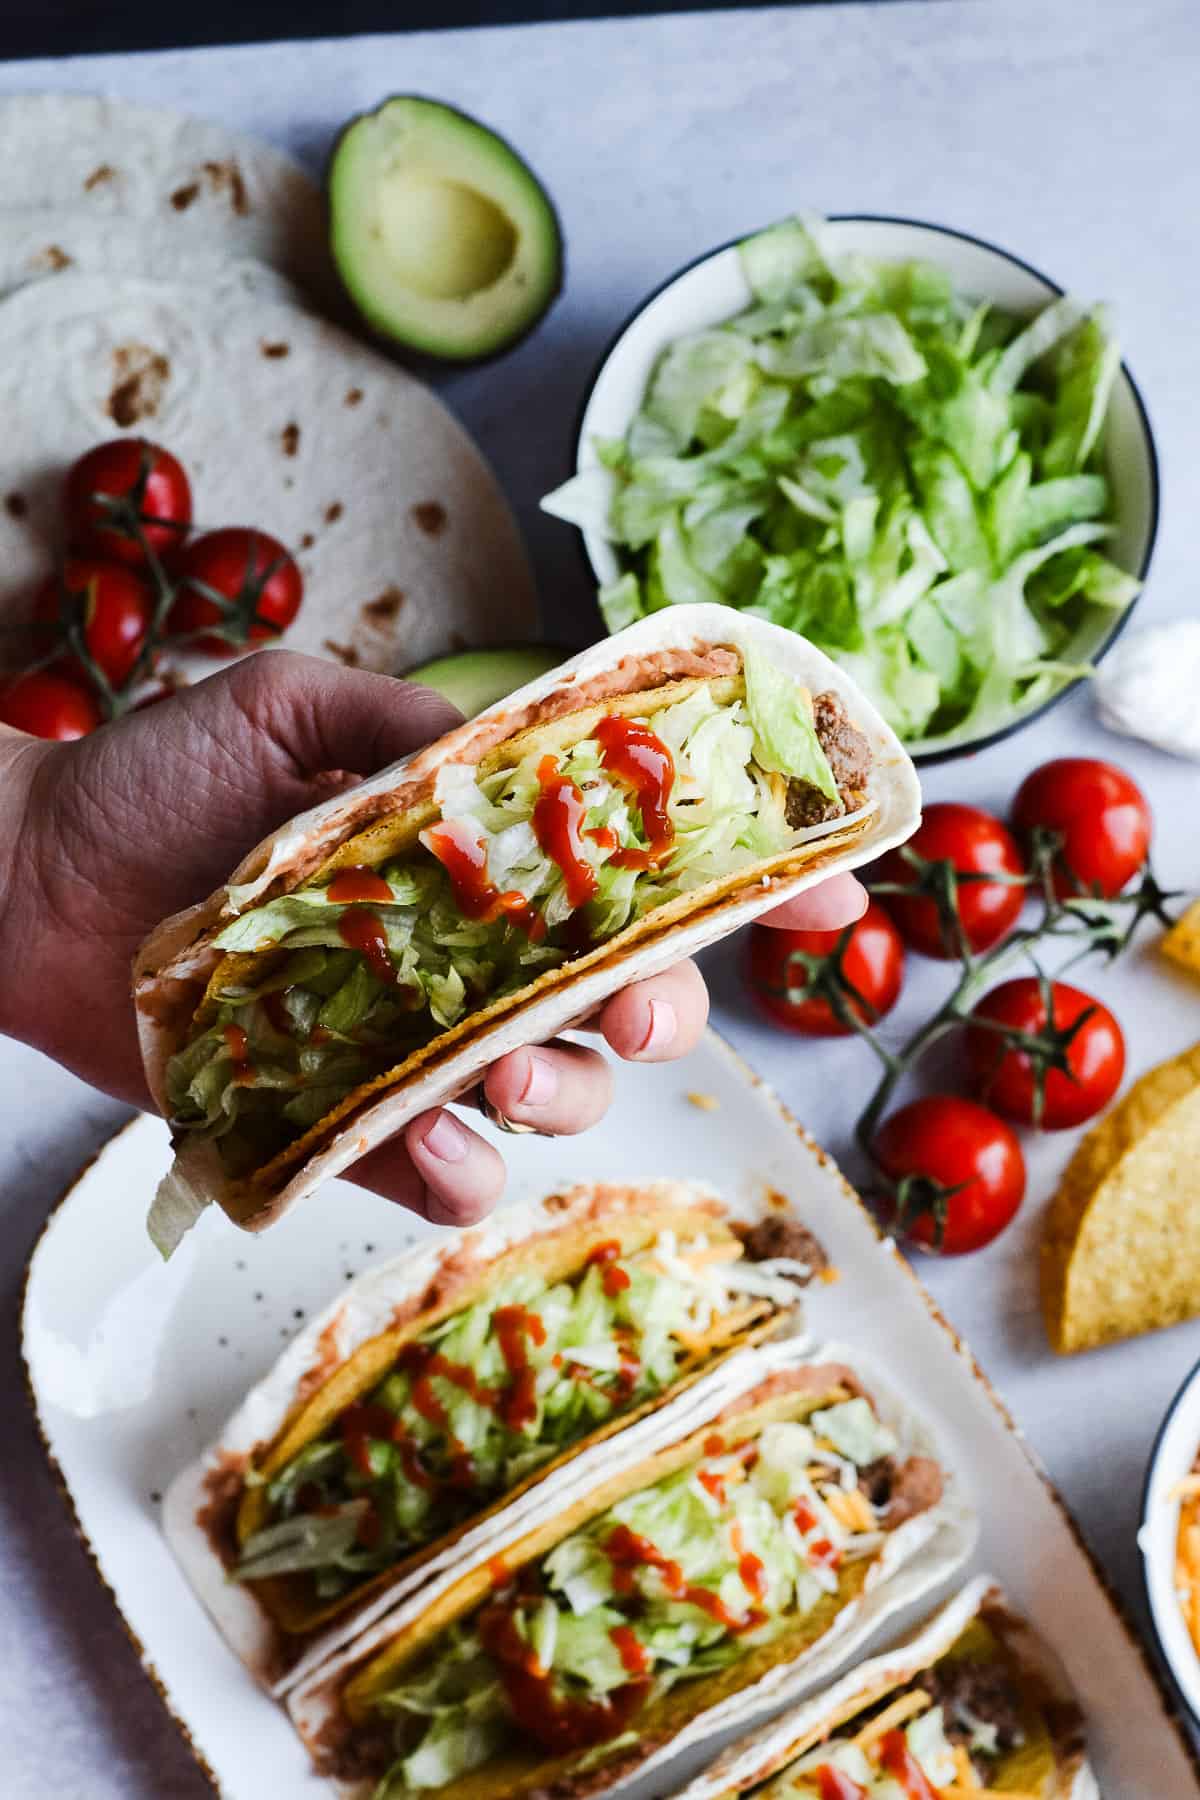 Hand holding taco with lettuce, avocado, tomatoes and taco shells in background.